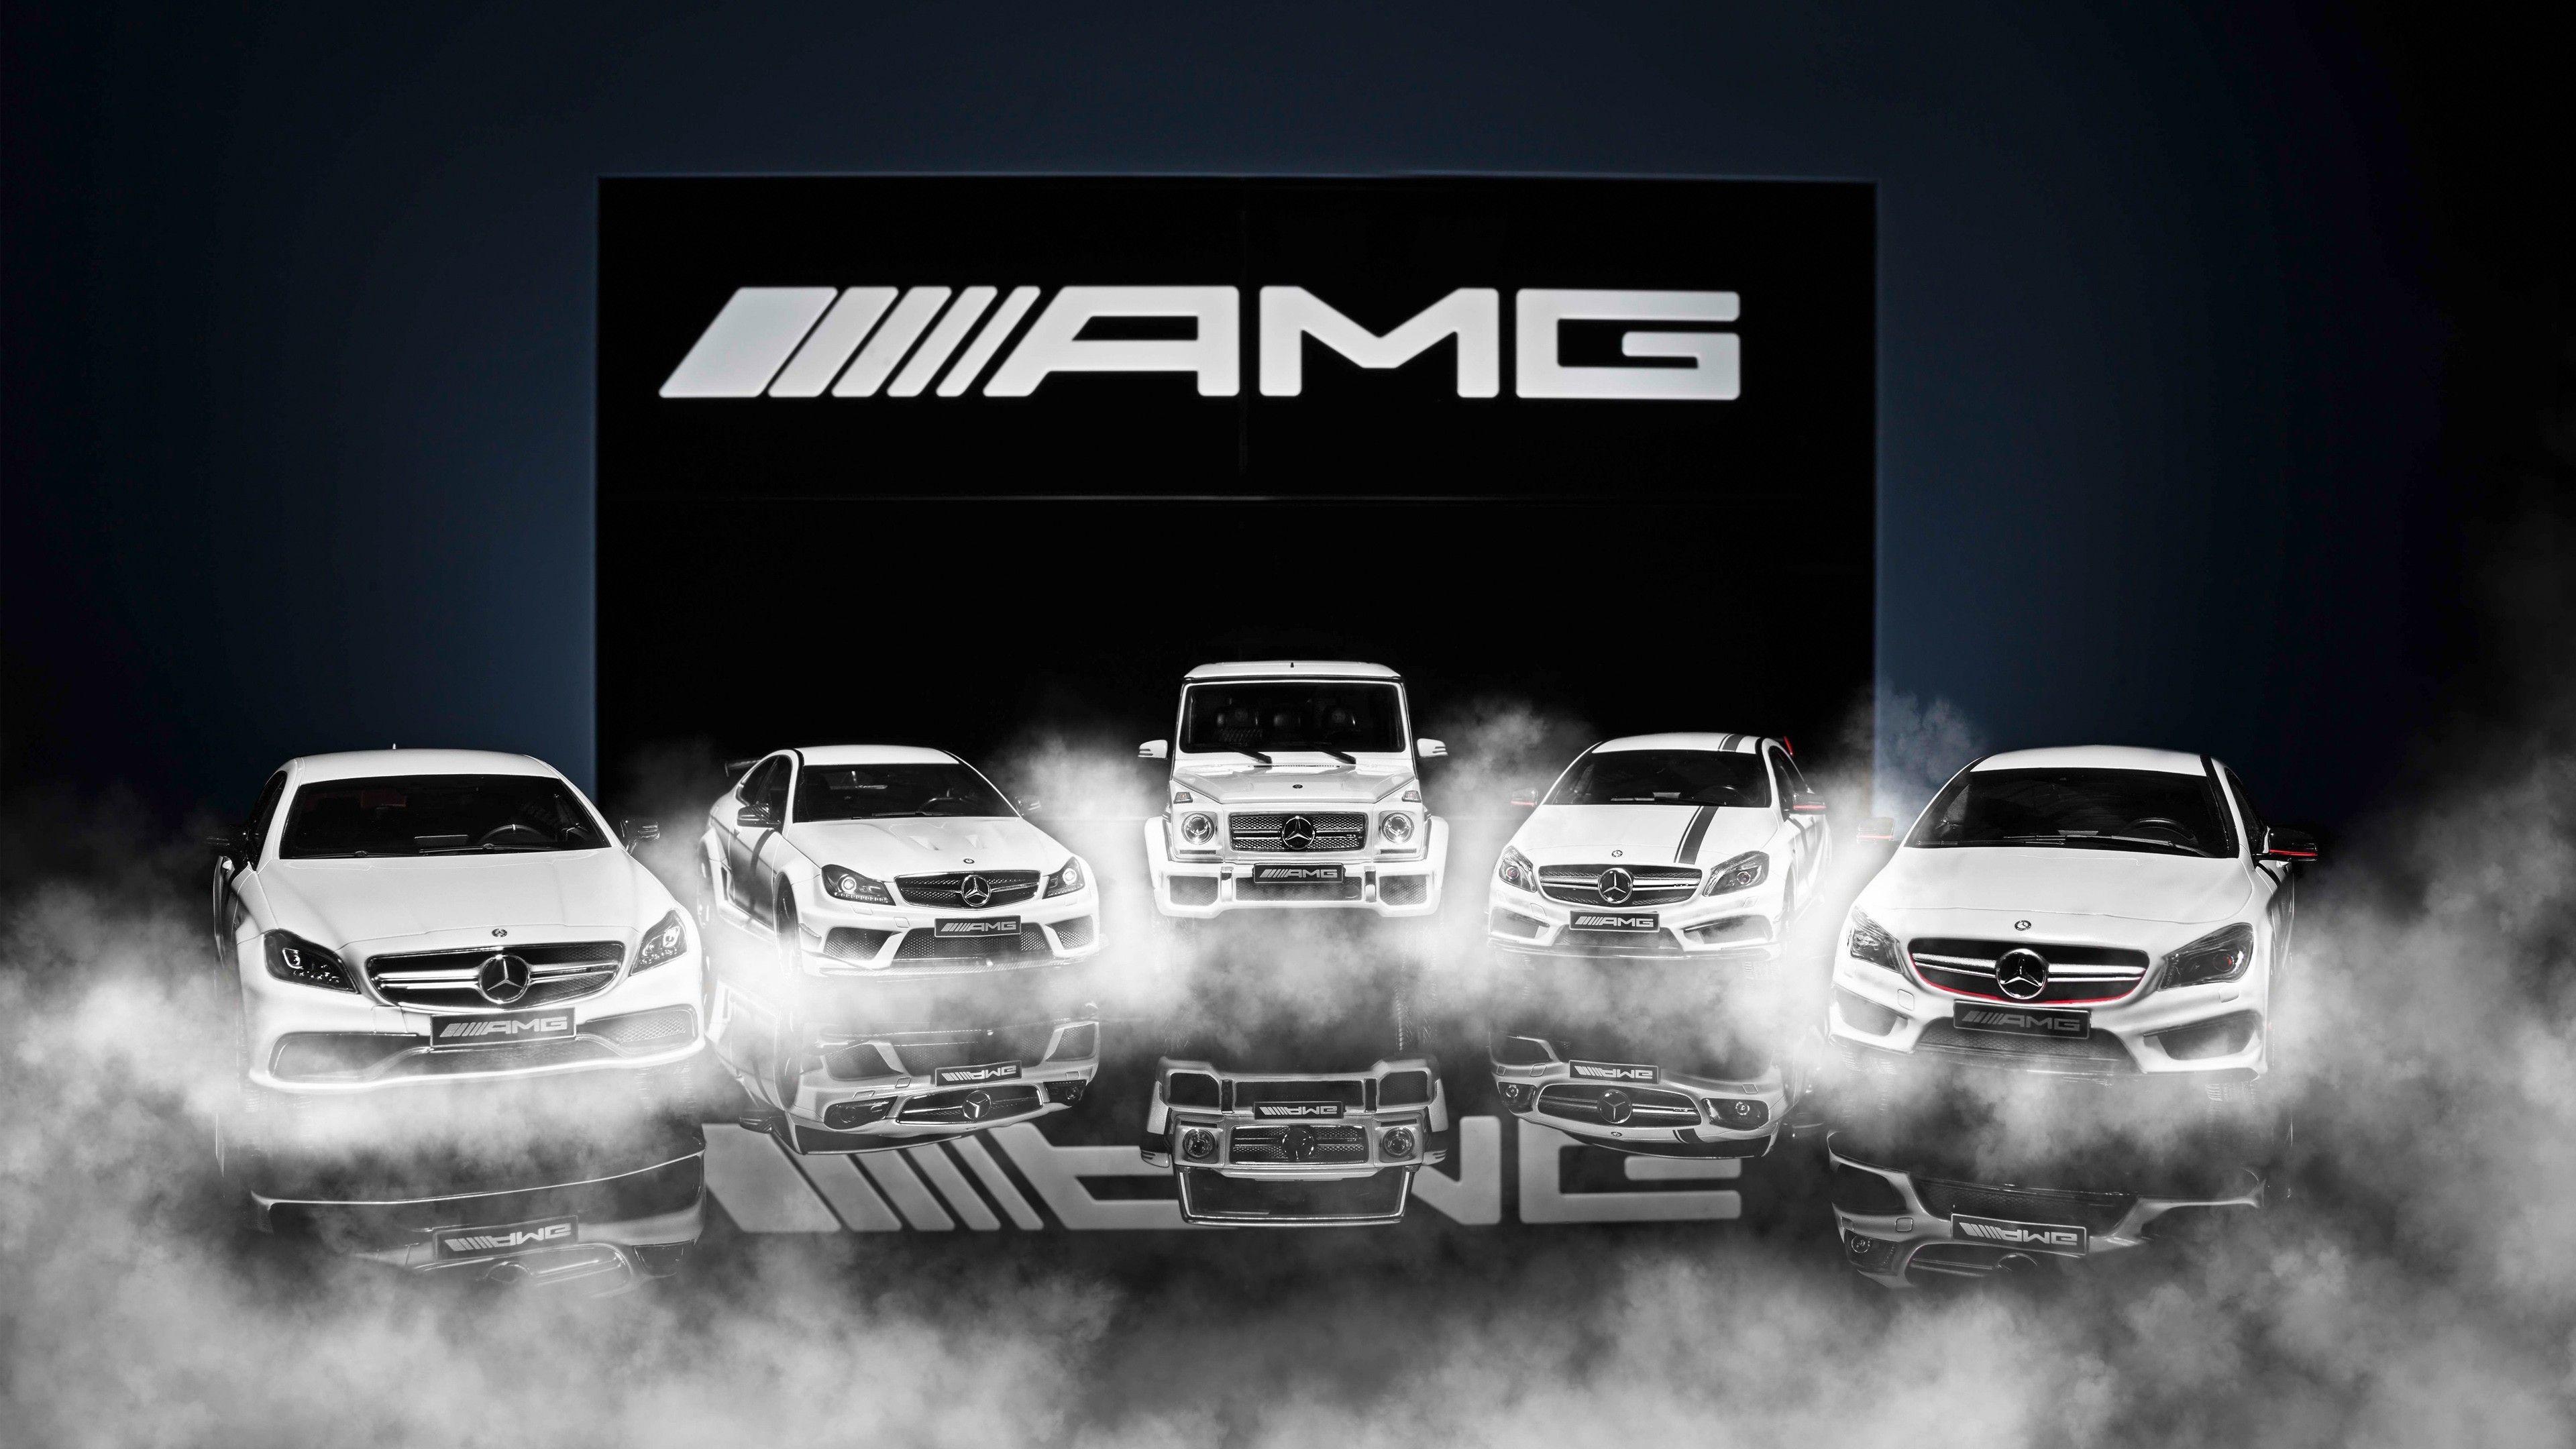 Mercedes amg logo wallpapers